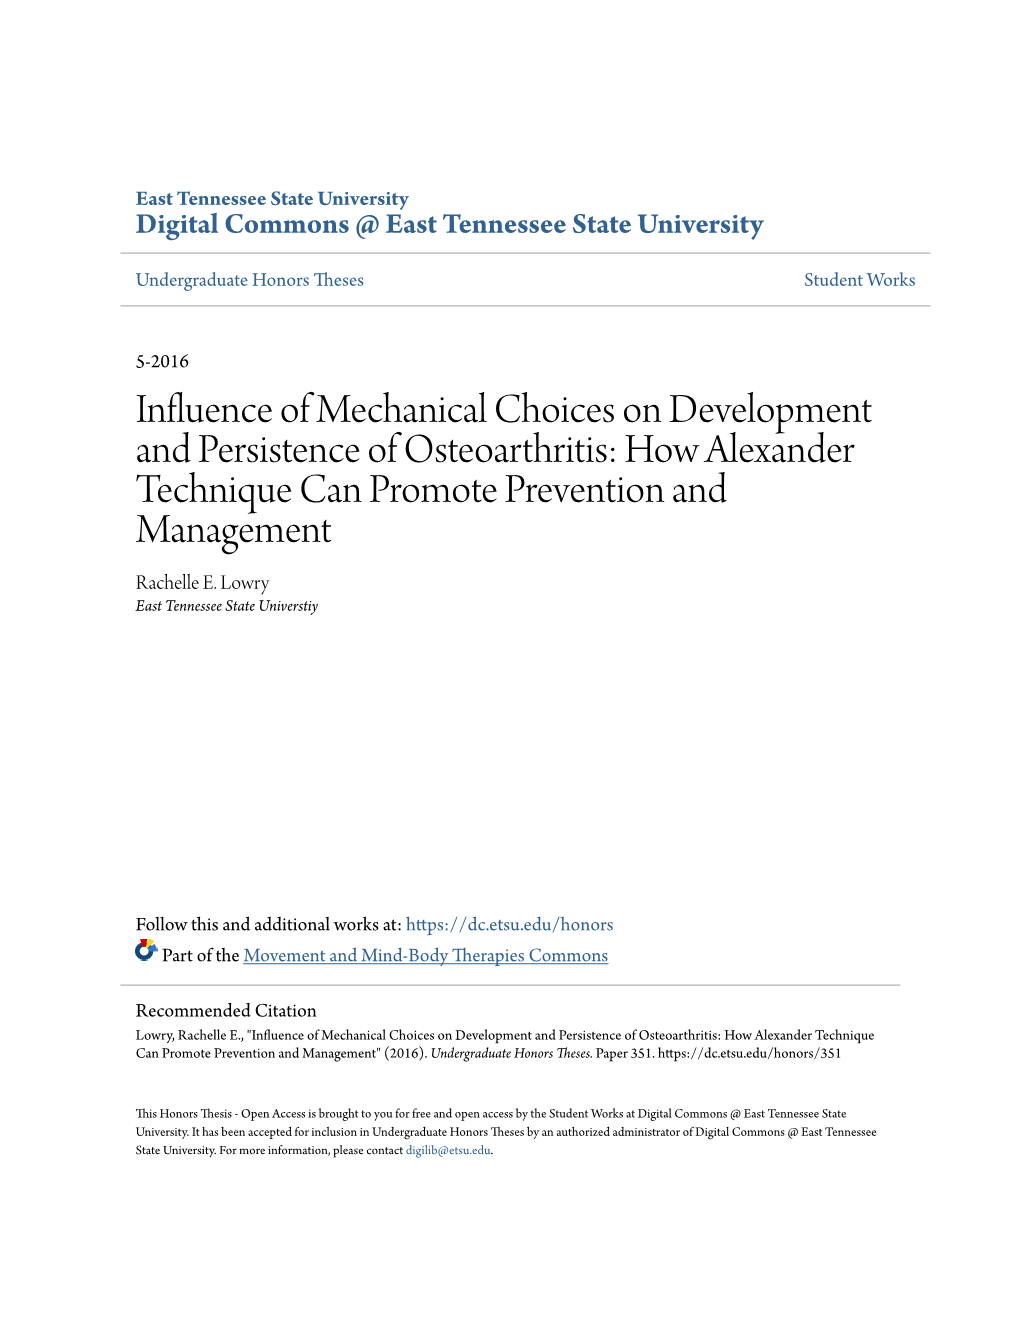 Influence of Mechanical Choices on Development and Persistence of Osteoarthritis: How Alexander Technique Can Promote Prevention and Management Rachelle E